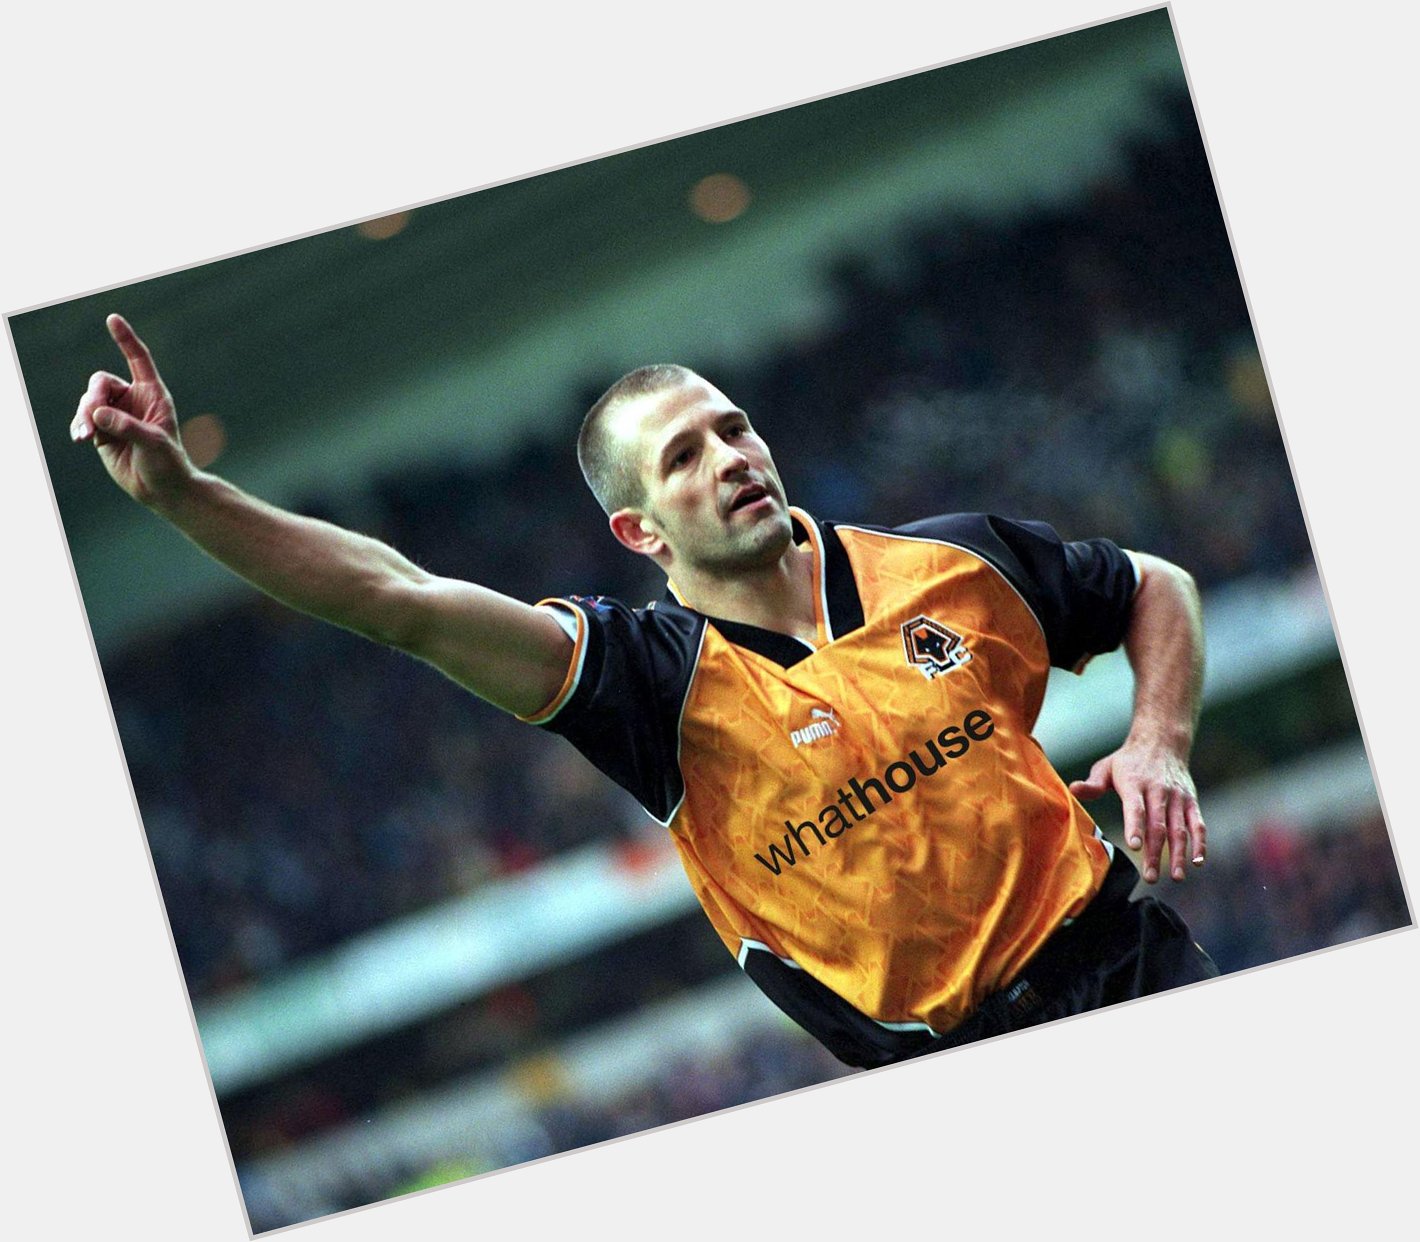 Happy birthday tomorrow to Steve Bull from with apologies to Goodyear   